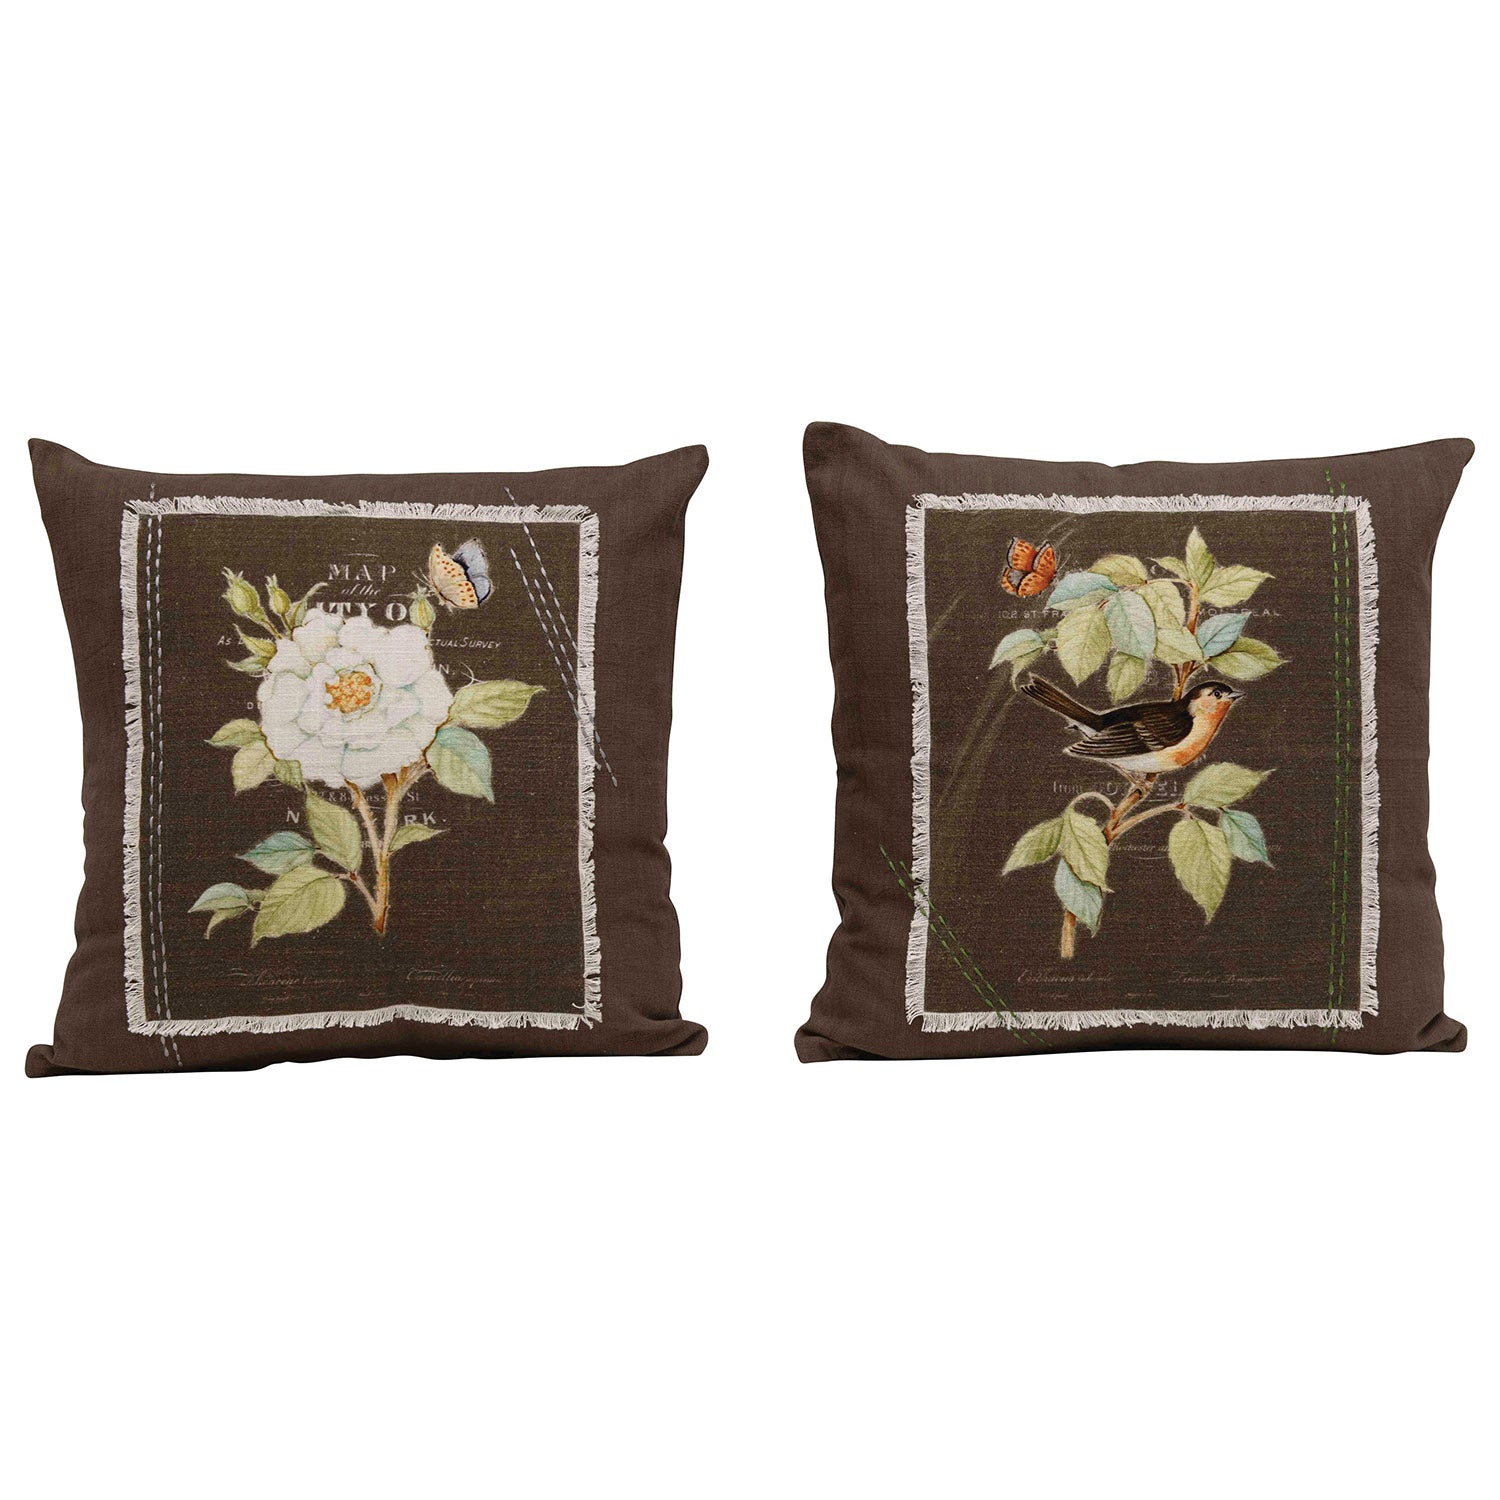 20" Square Woven Cotton Pillow w/ Flower, Applique & Embroidery, Iron Color, 2 Styles ©